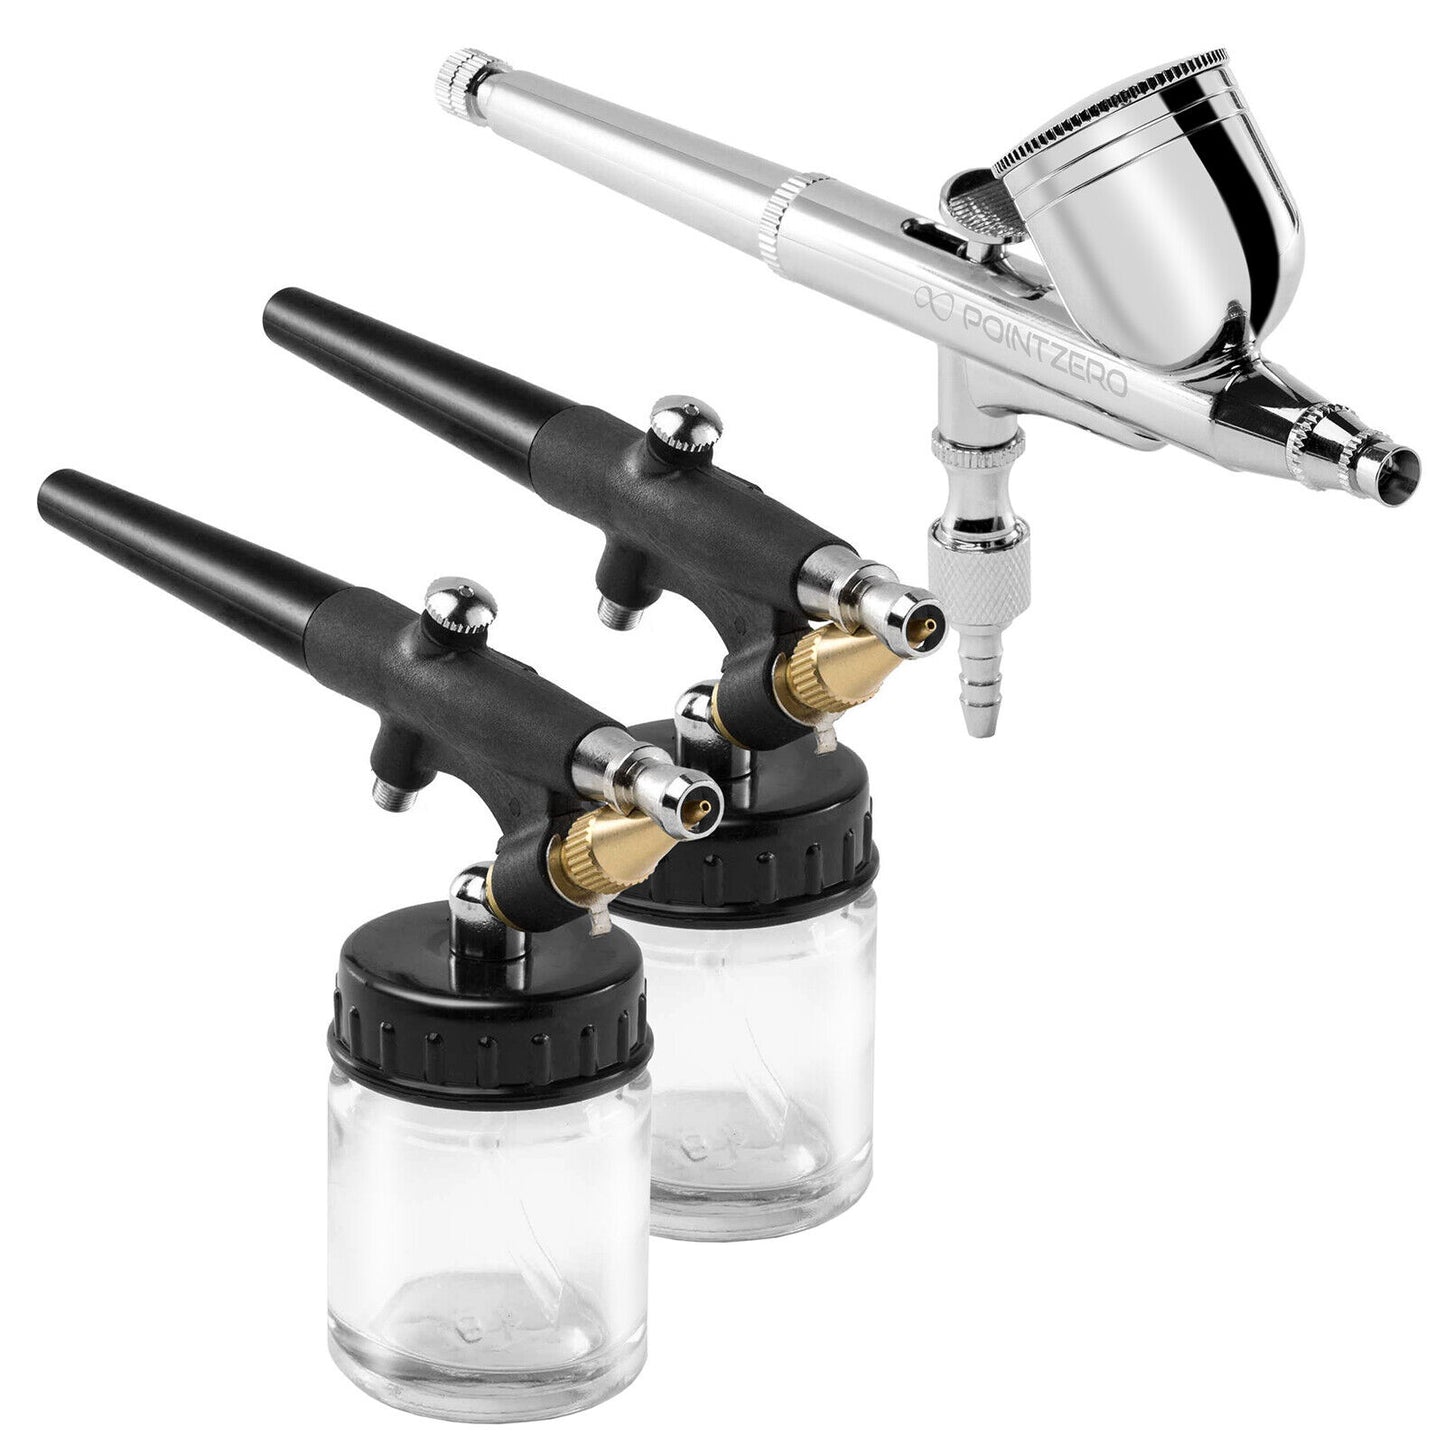 Airbrush Kit - Gravity Siphon Feed Air Compressor Crafts Hobby Art